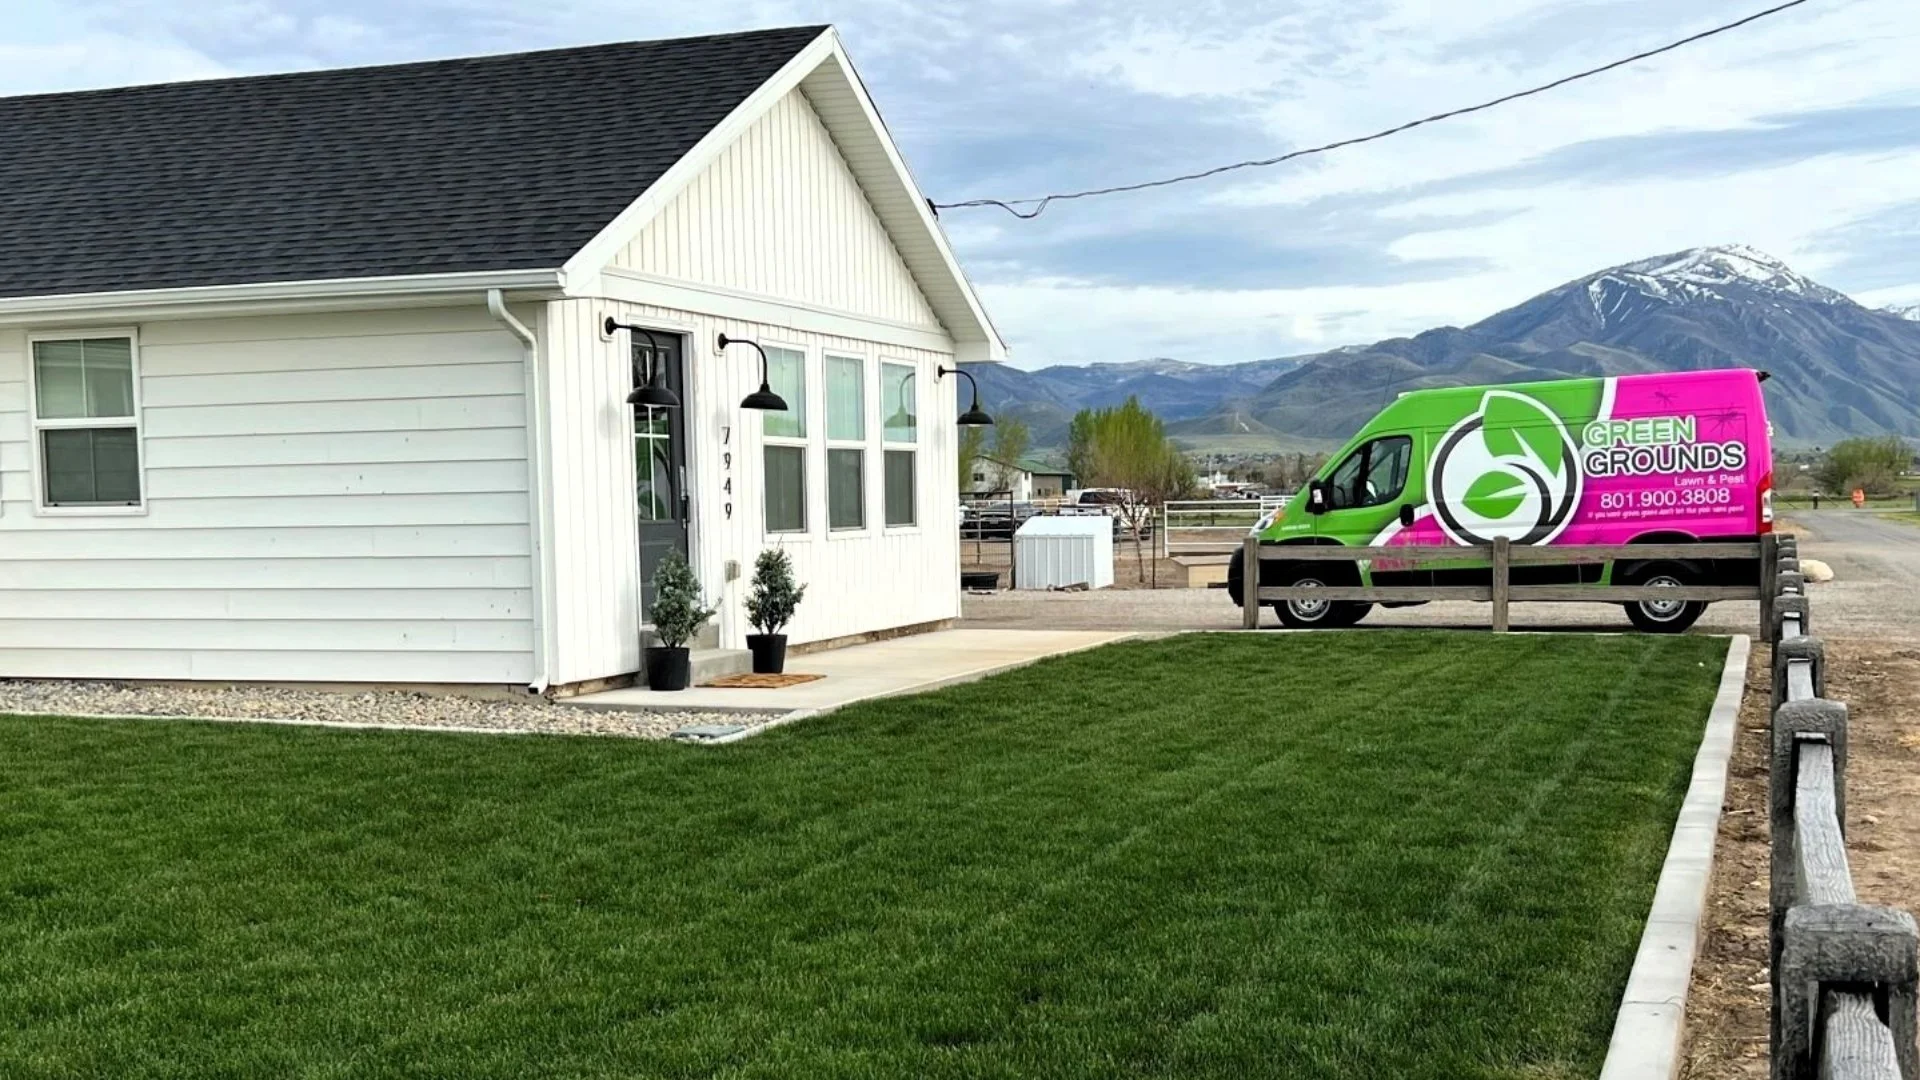 Company car in front of a customer's home in Midway, UT.